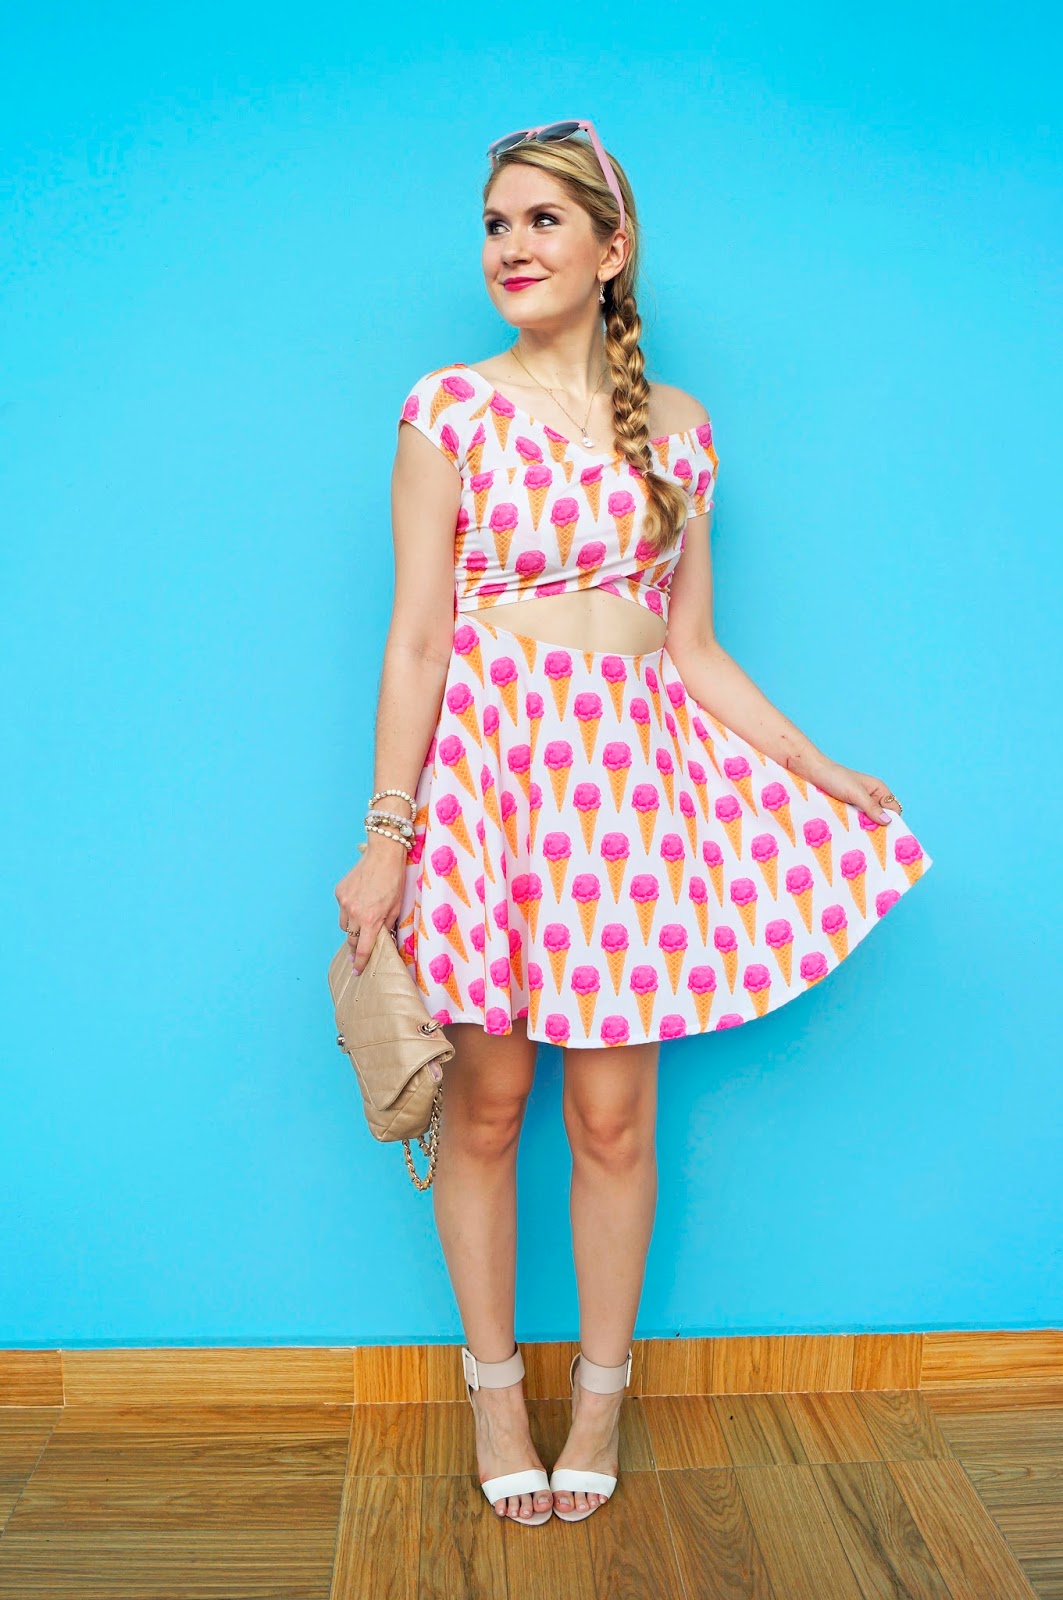 Loving this super cute girly outfit!